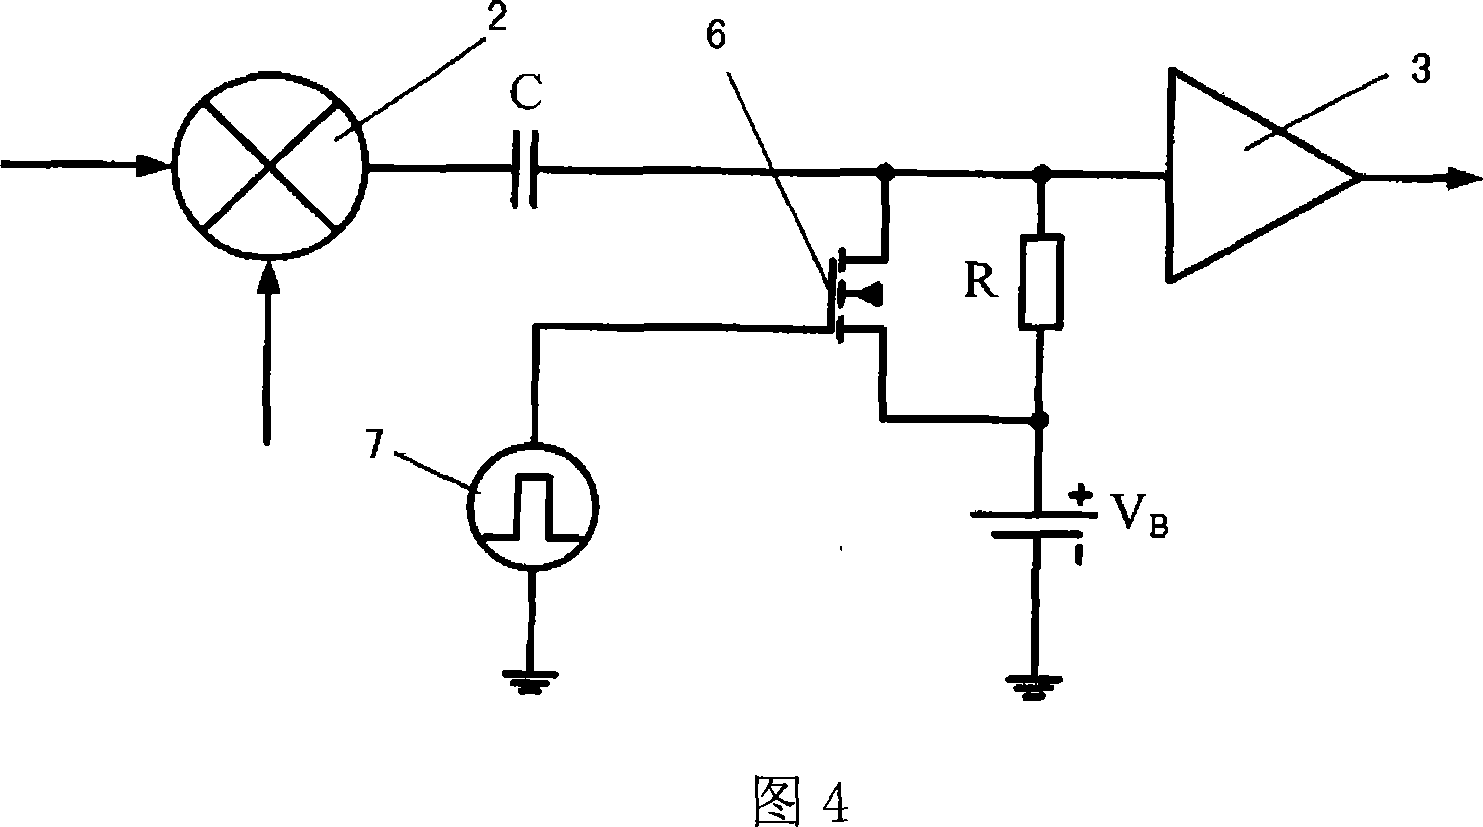 Variable bandwidth filter circuit for RFID read-write equipment